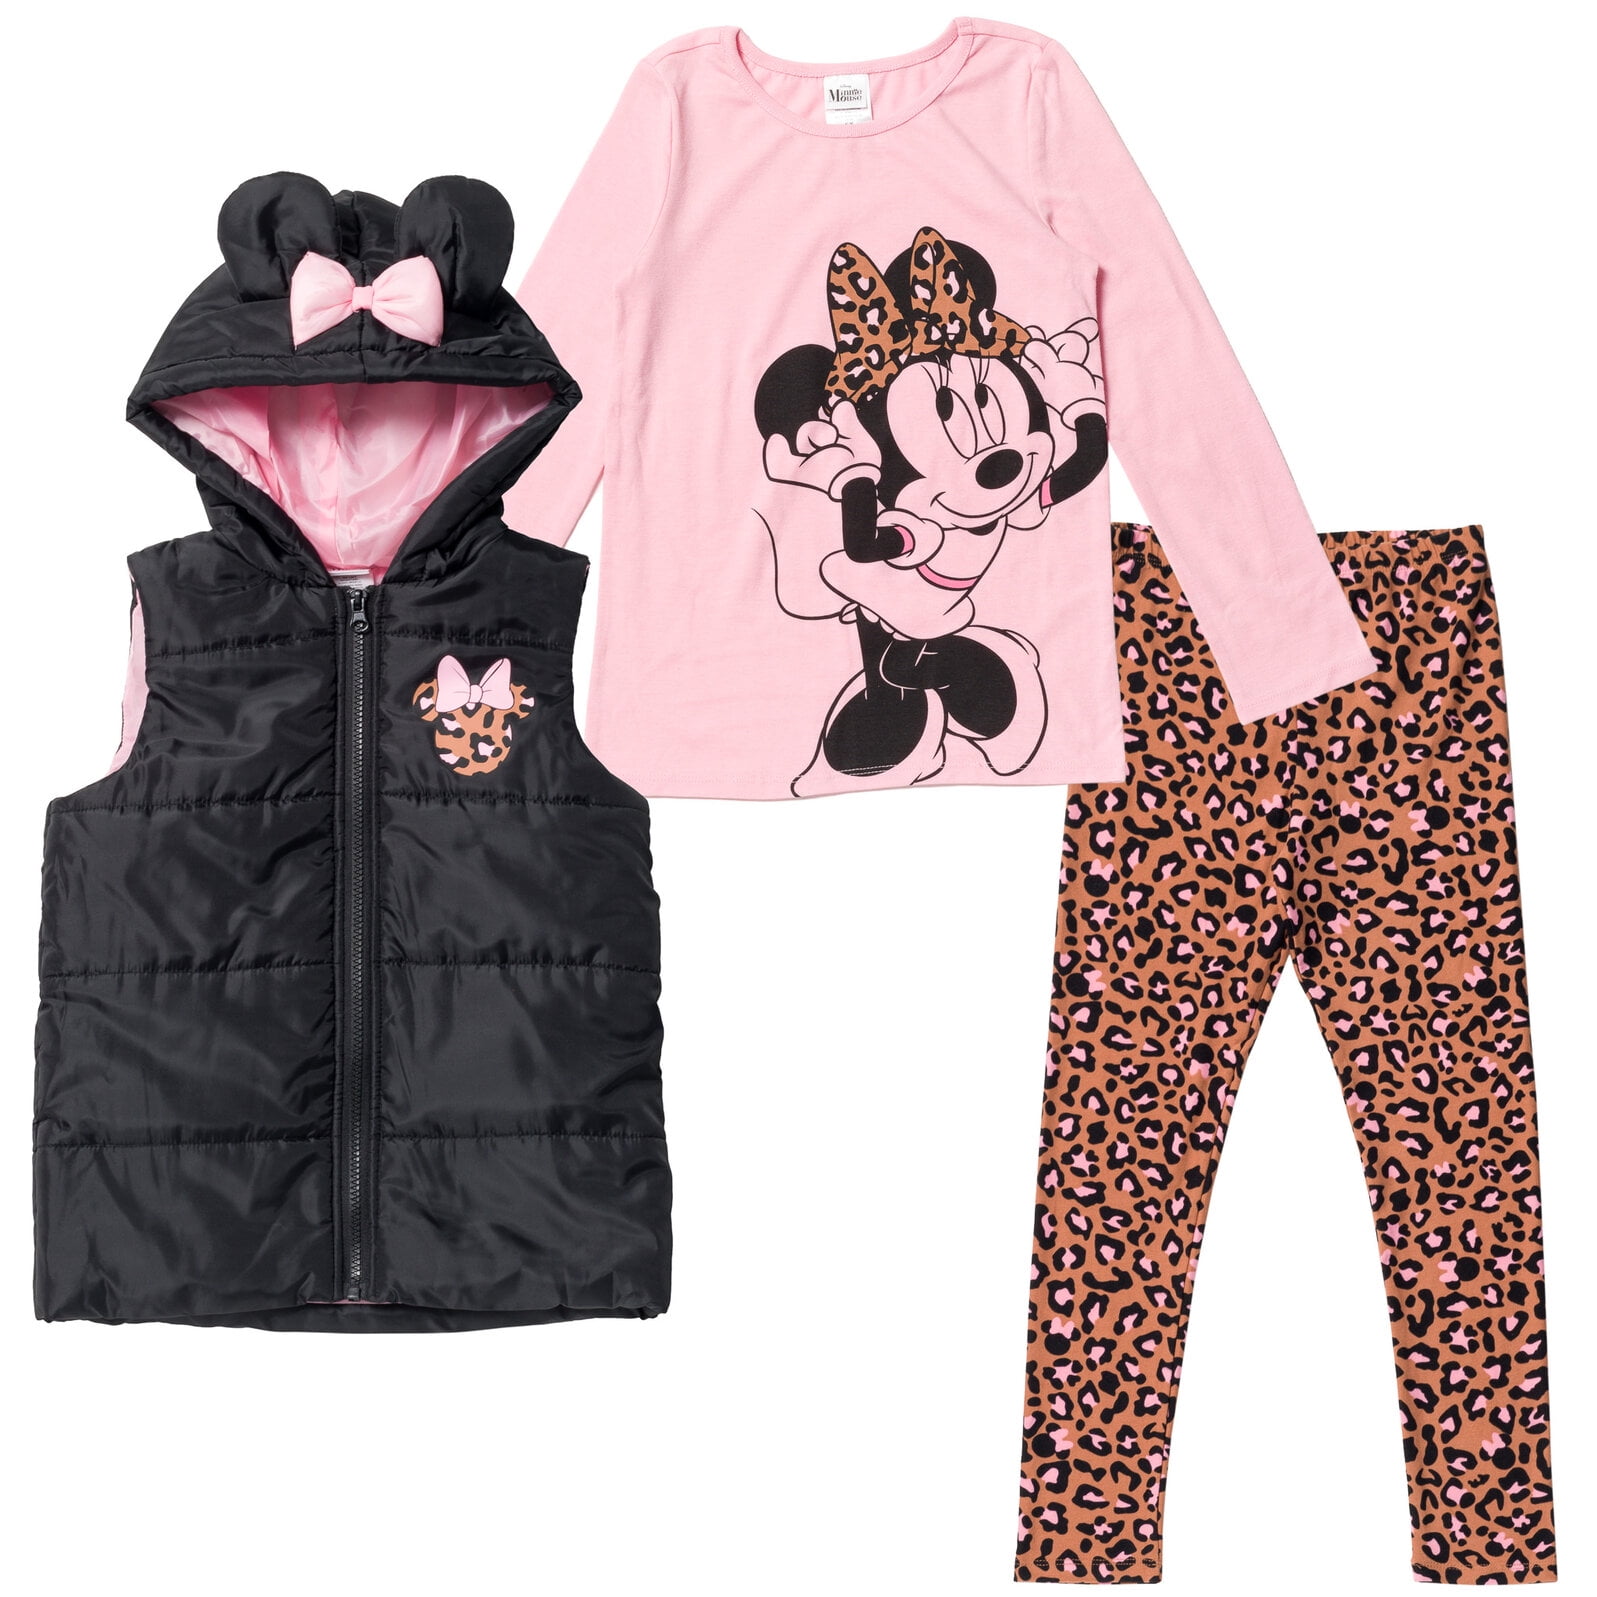  Disney Minnie Mouse Infant Baby Girls Graphic T-Shirt & Leggings  Red/Black 12 Months: Clothing, Shoes & Jewelry